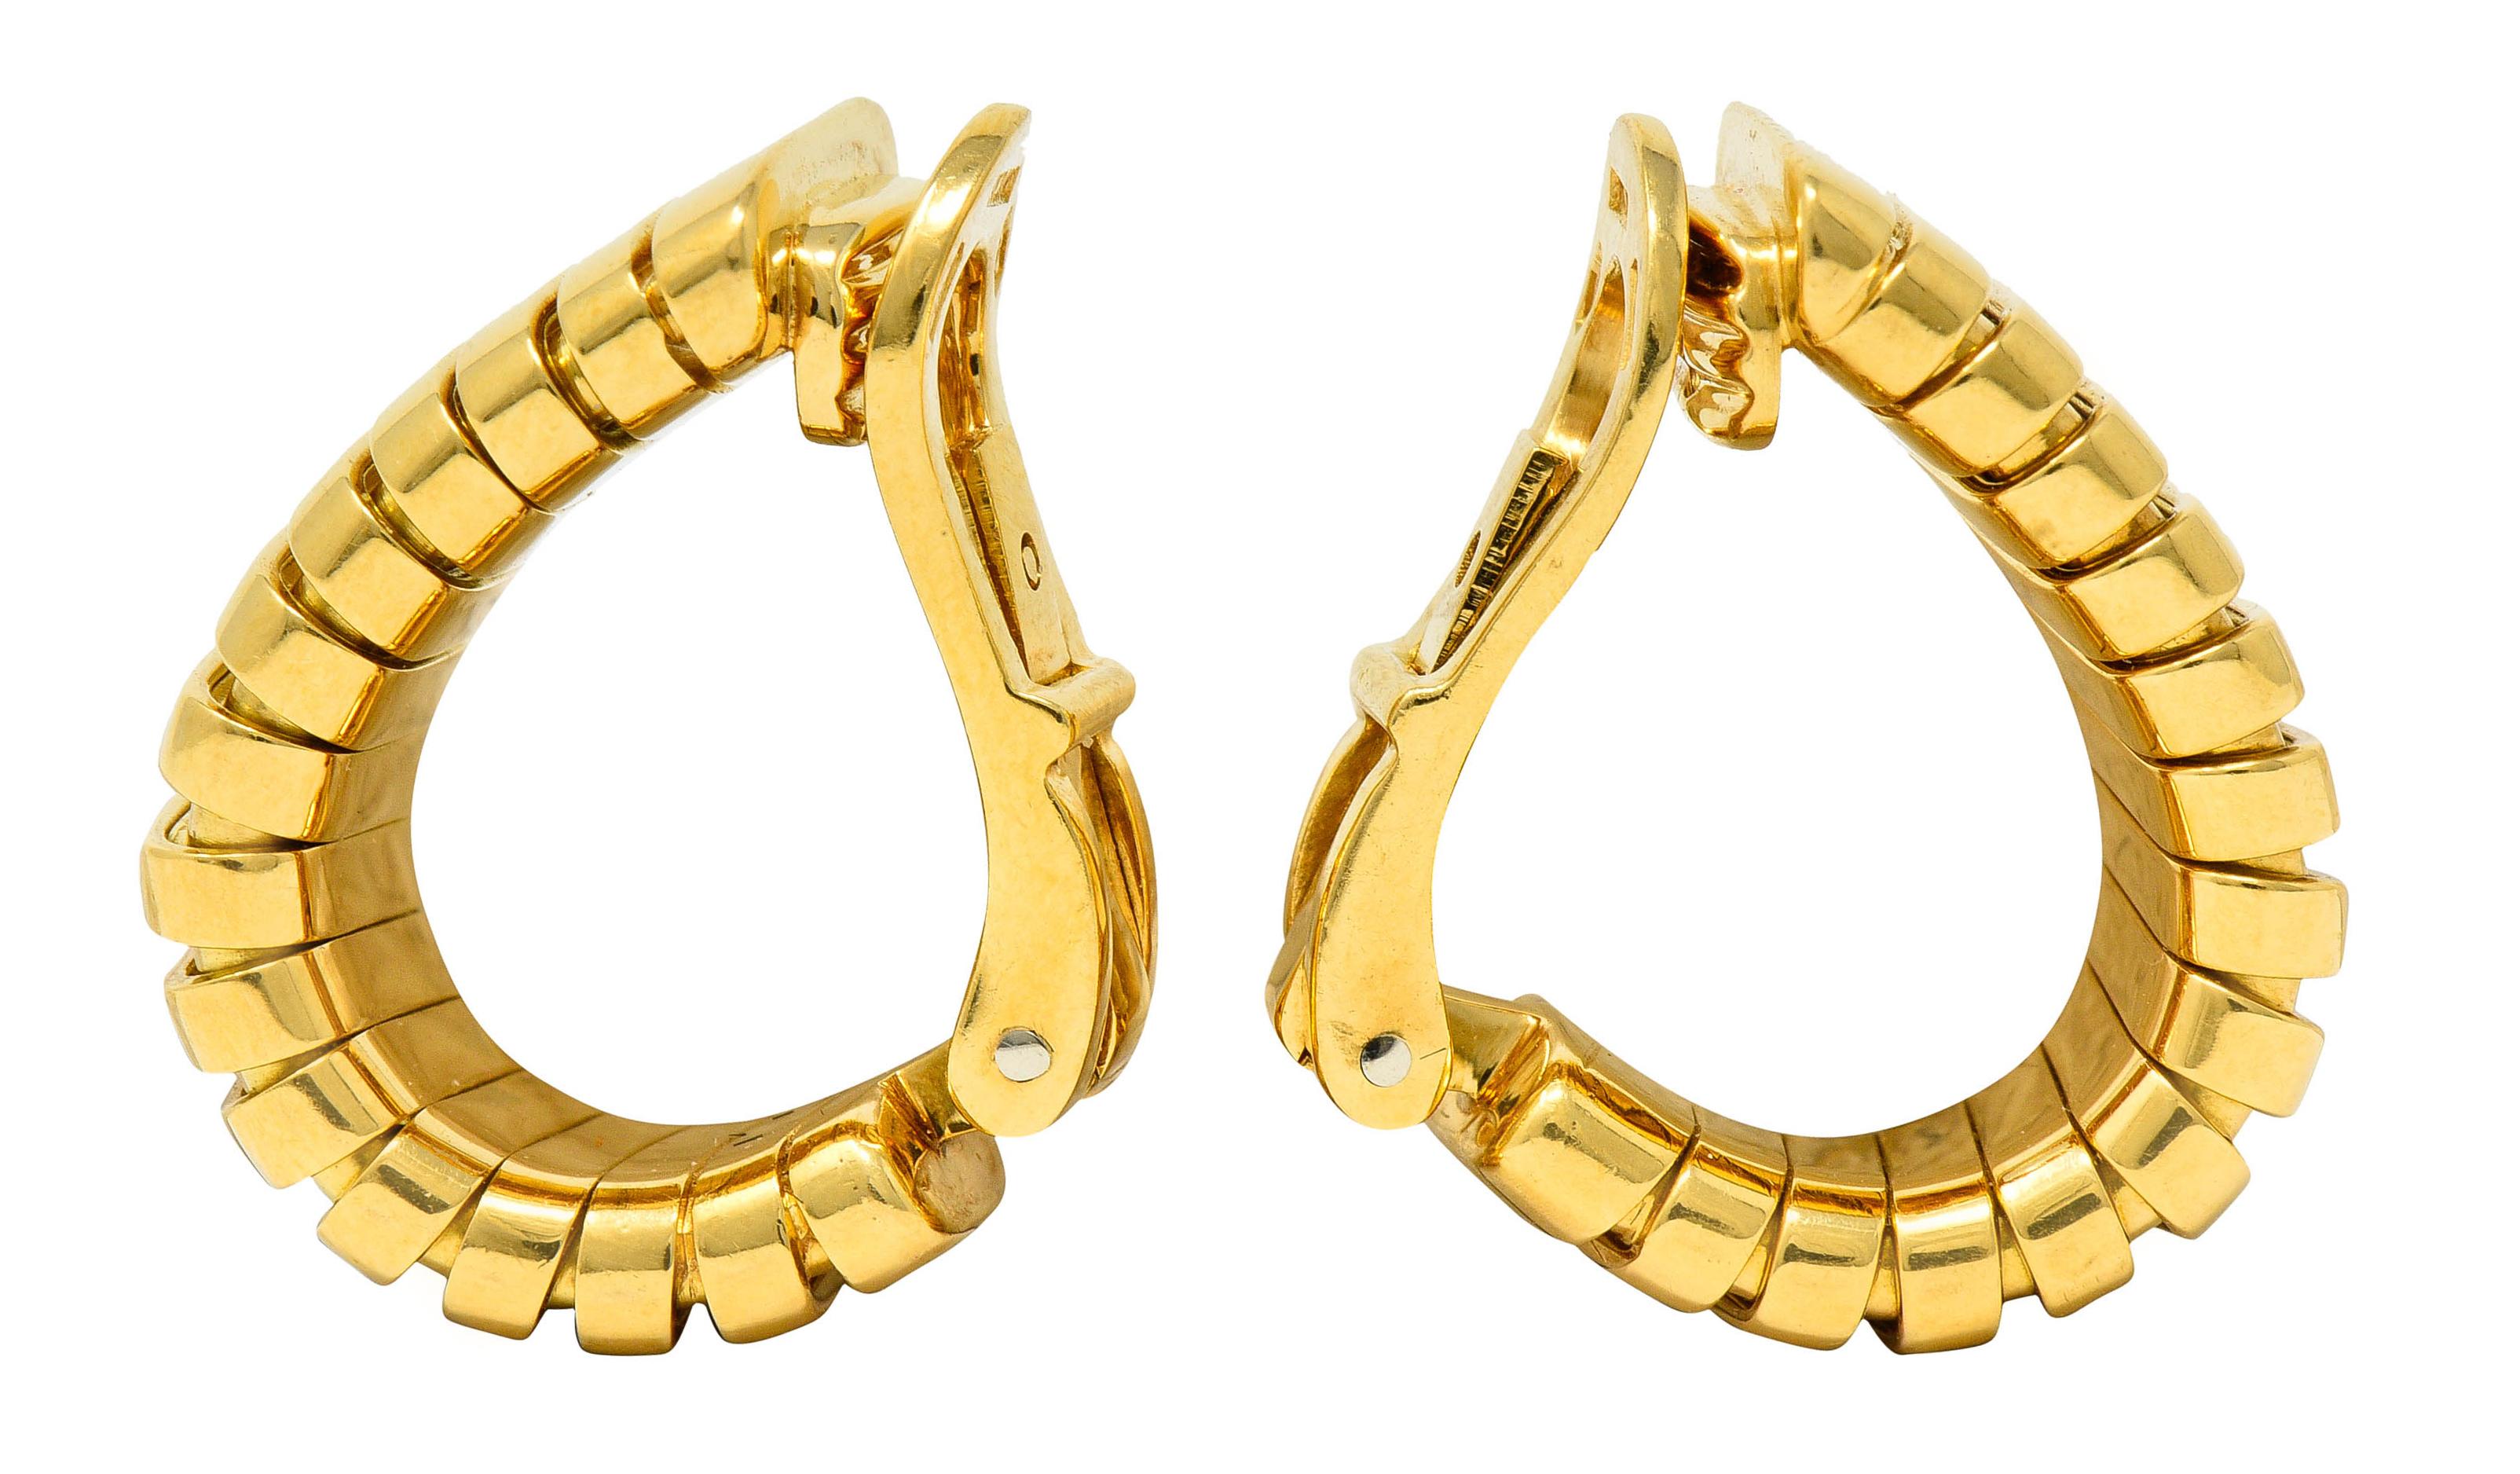 J hoop style earrings comprised of tubogas technology

Deeply ridged and brightly polished

Completed by hinged omega backs

With Italian assay marks for 18 karat gold

Fully signed Bvlgari

Circa: 1970s

Measures: 1/2 x 3/4 inch

Total weight: 21.5